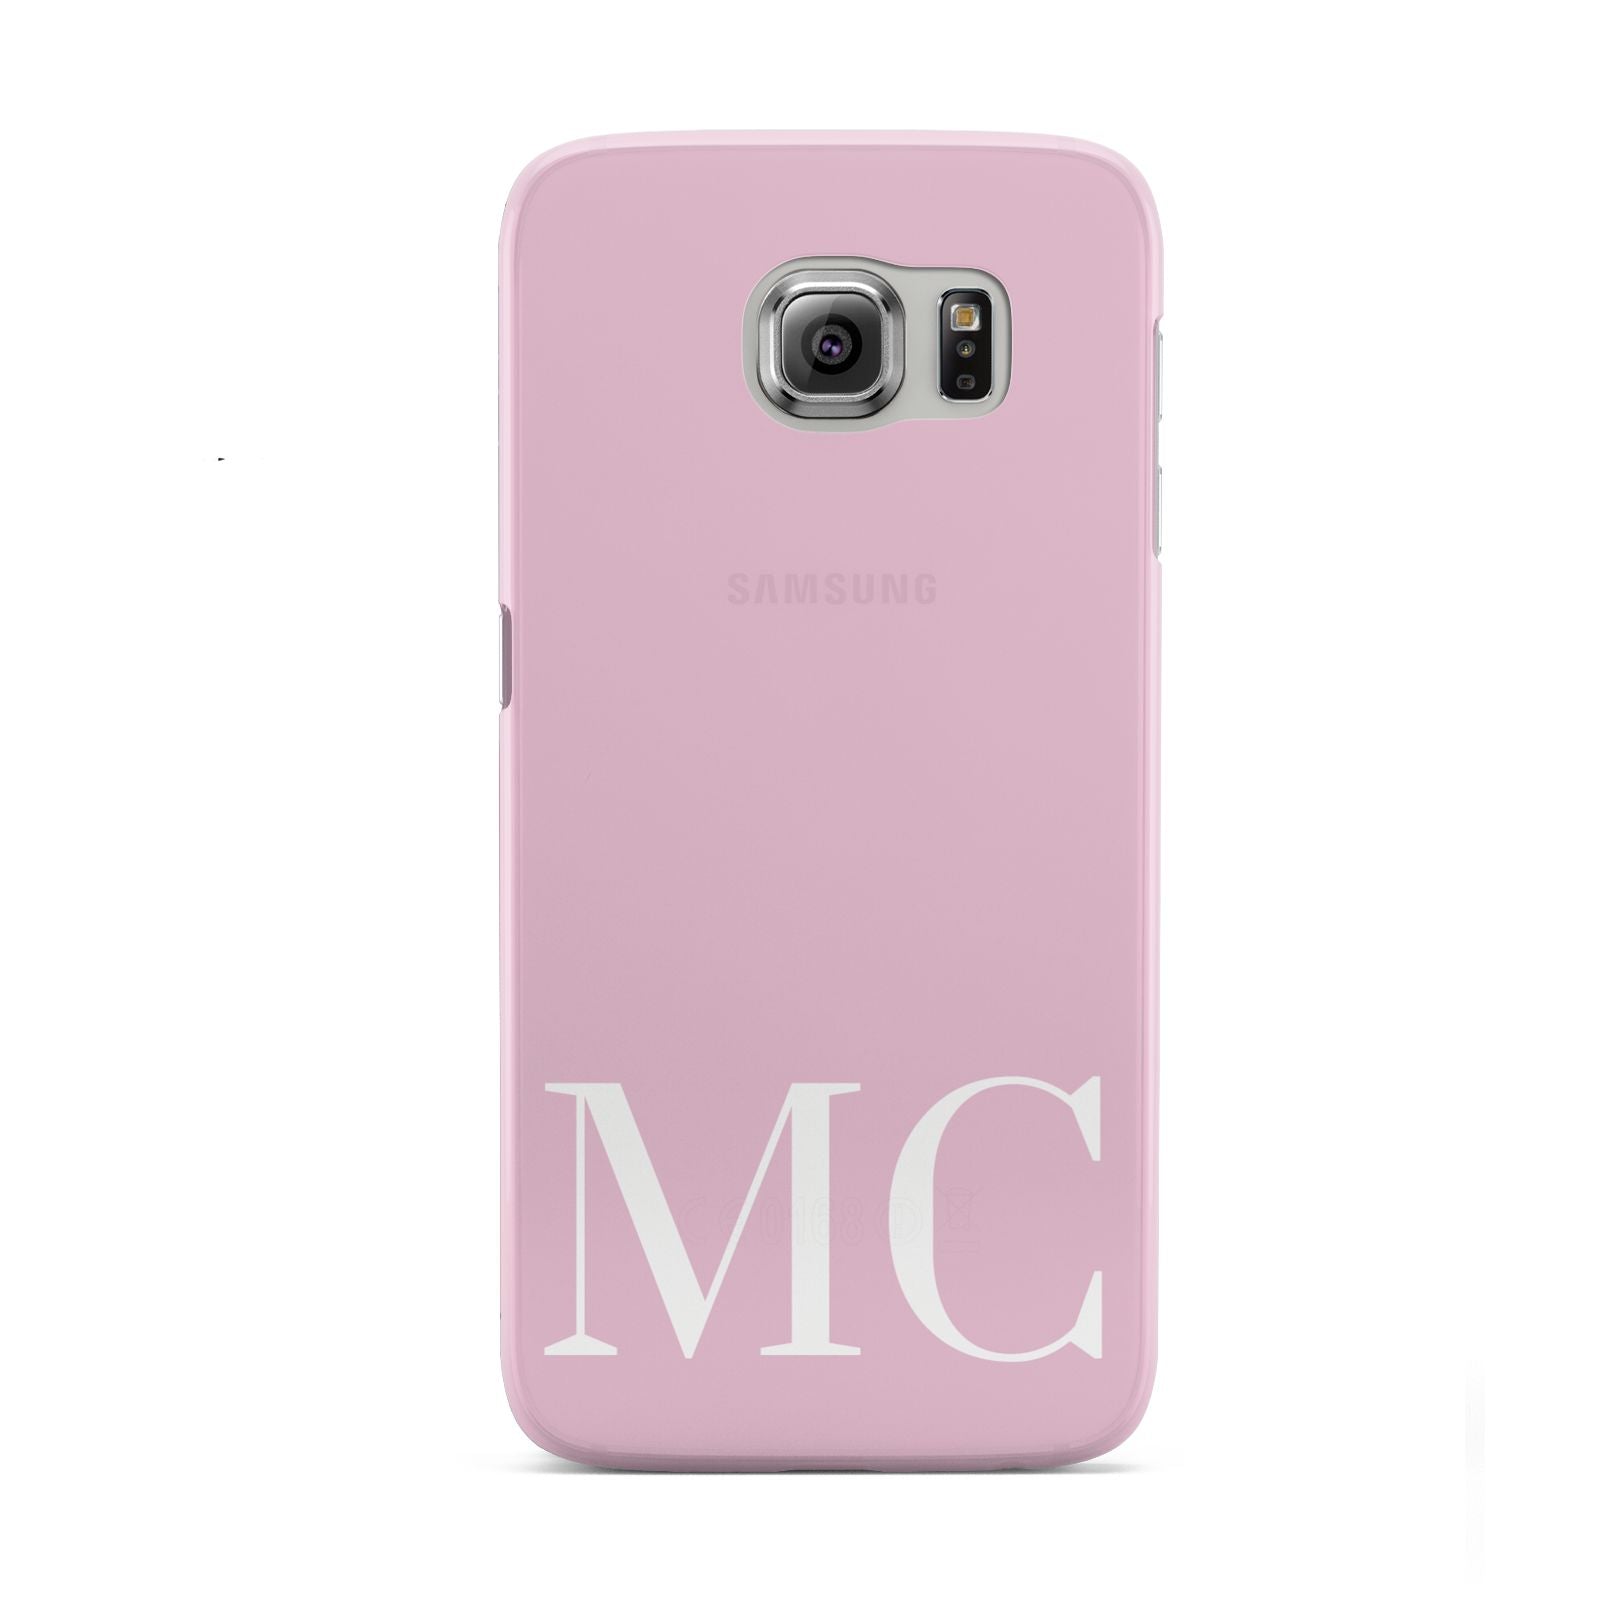 Initials Personalised 2 Samsung Galaxy S6 Case